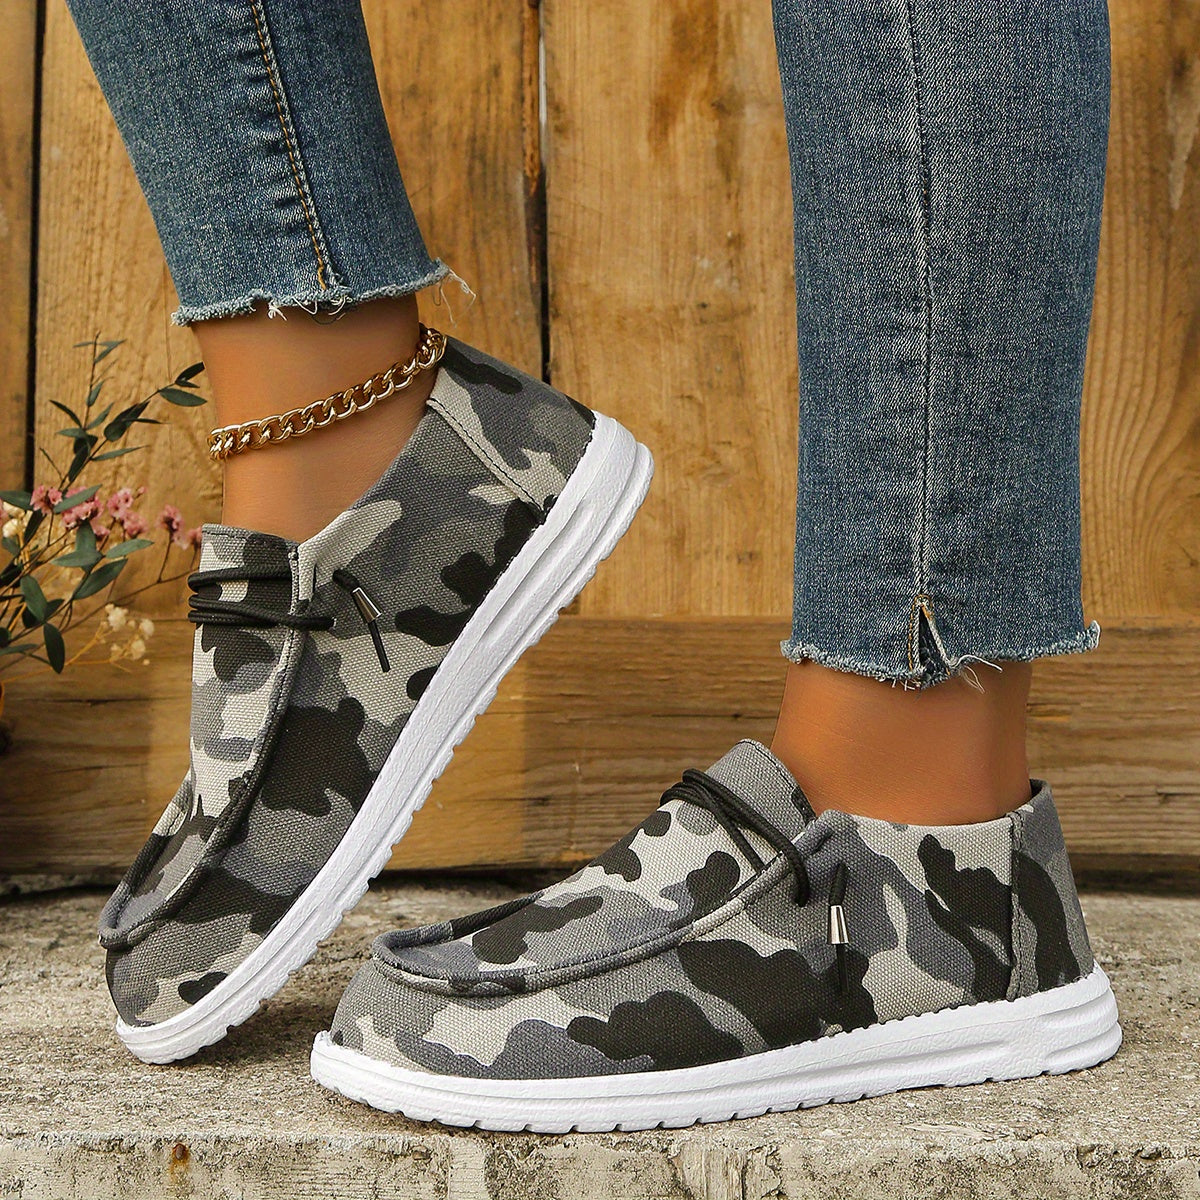 Women's Camouflage Canvas Shoes, Casual Round Toe Low Top Slip On Shoes, Flat Walking Loafers